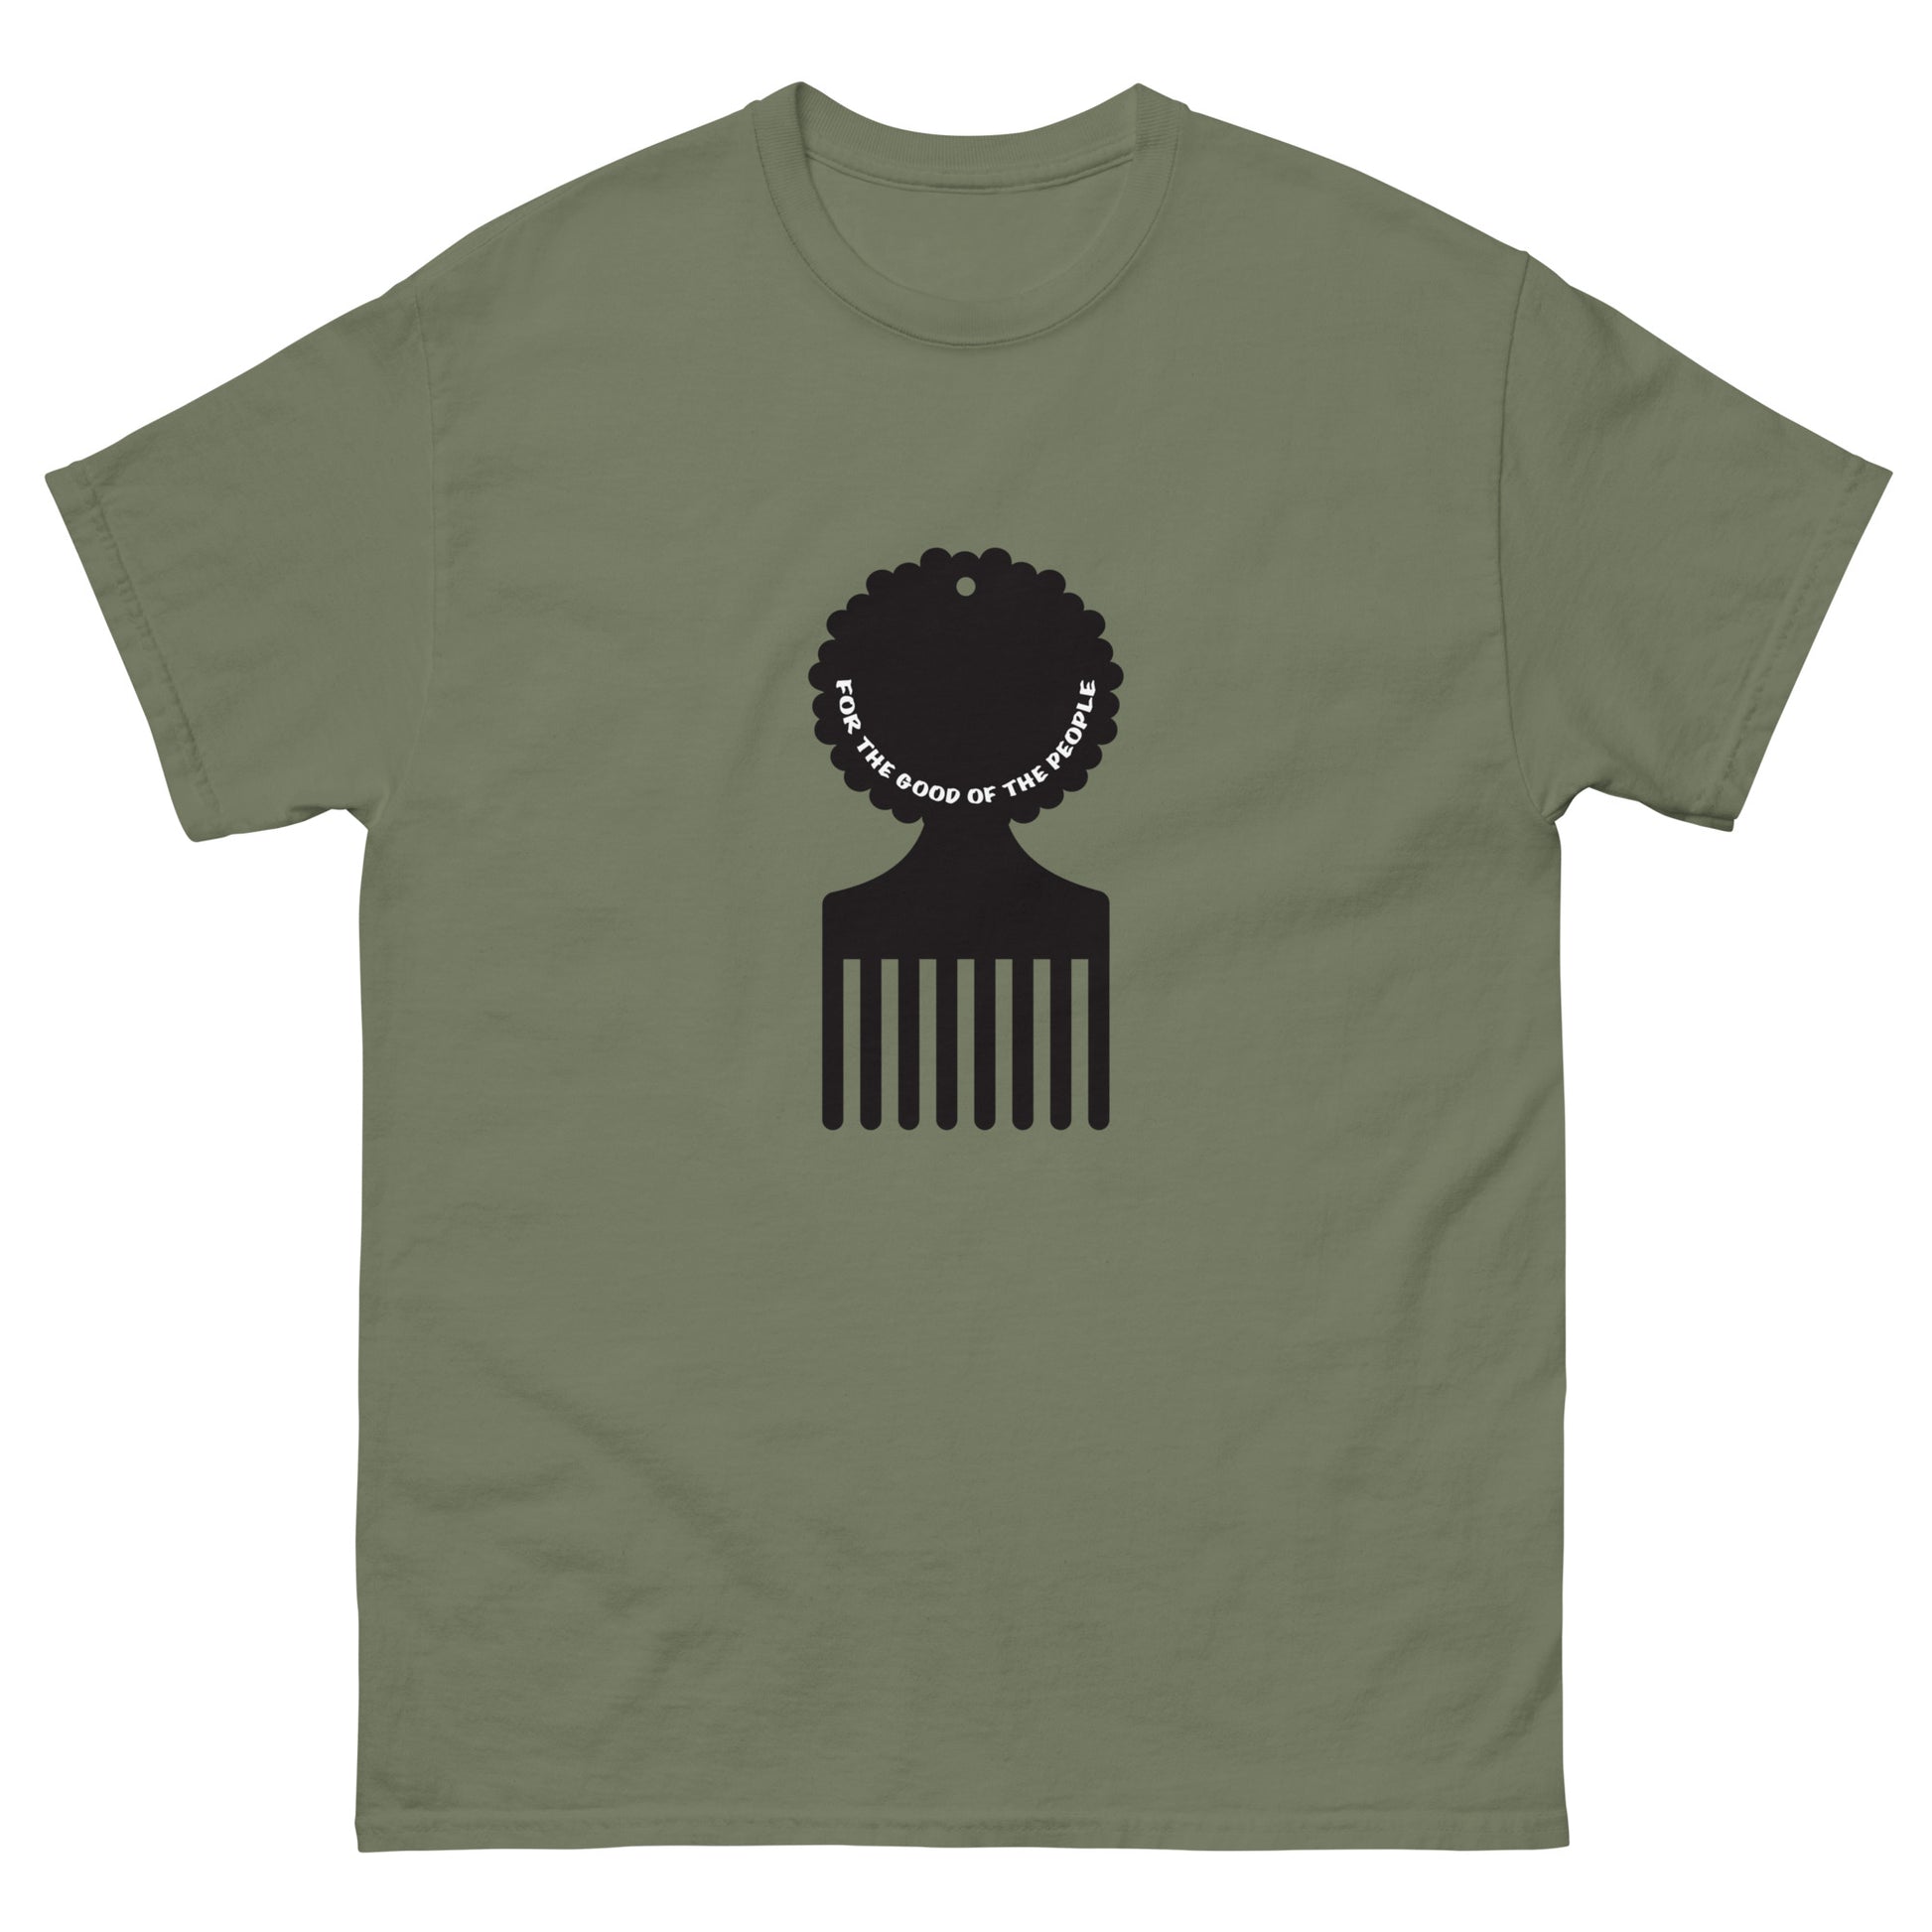 Men's military green tee with black afro pick in the center of shirt, with for the good of the people in white inside the afro pick's handle.